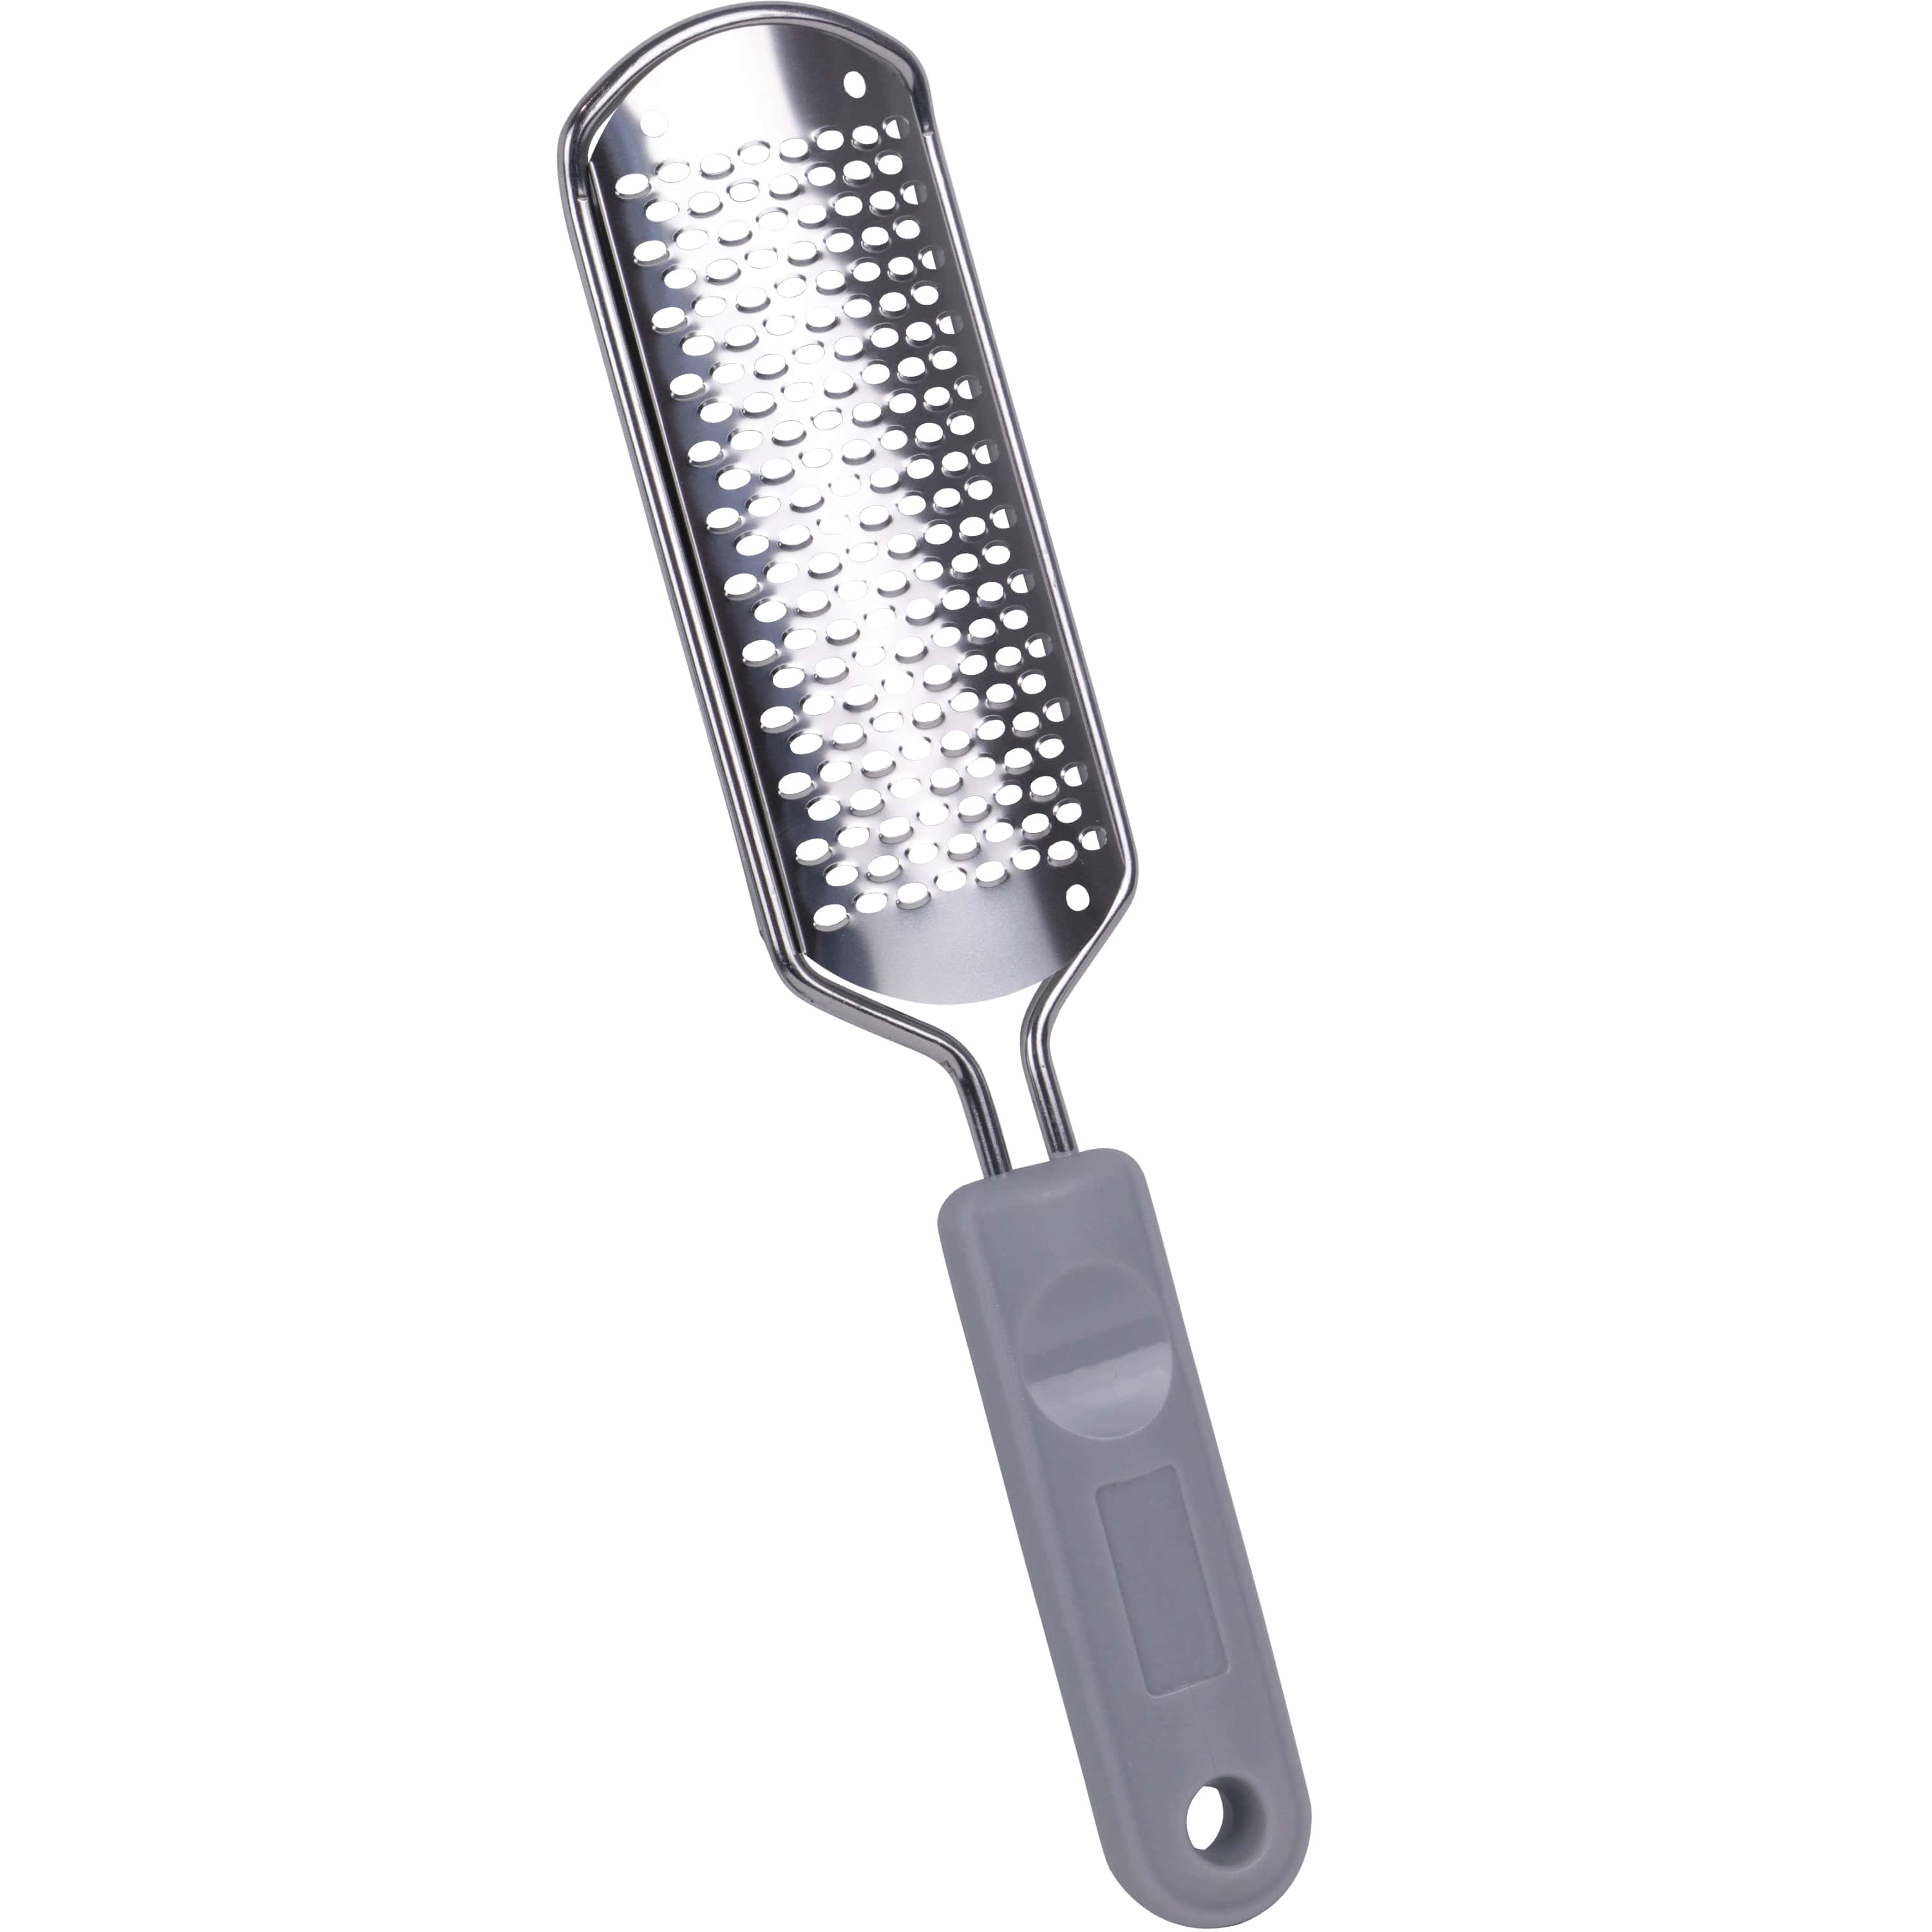 Foot File, Callus Remover, 1 Stainless Steel Foot File